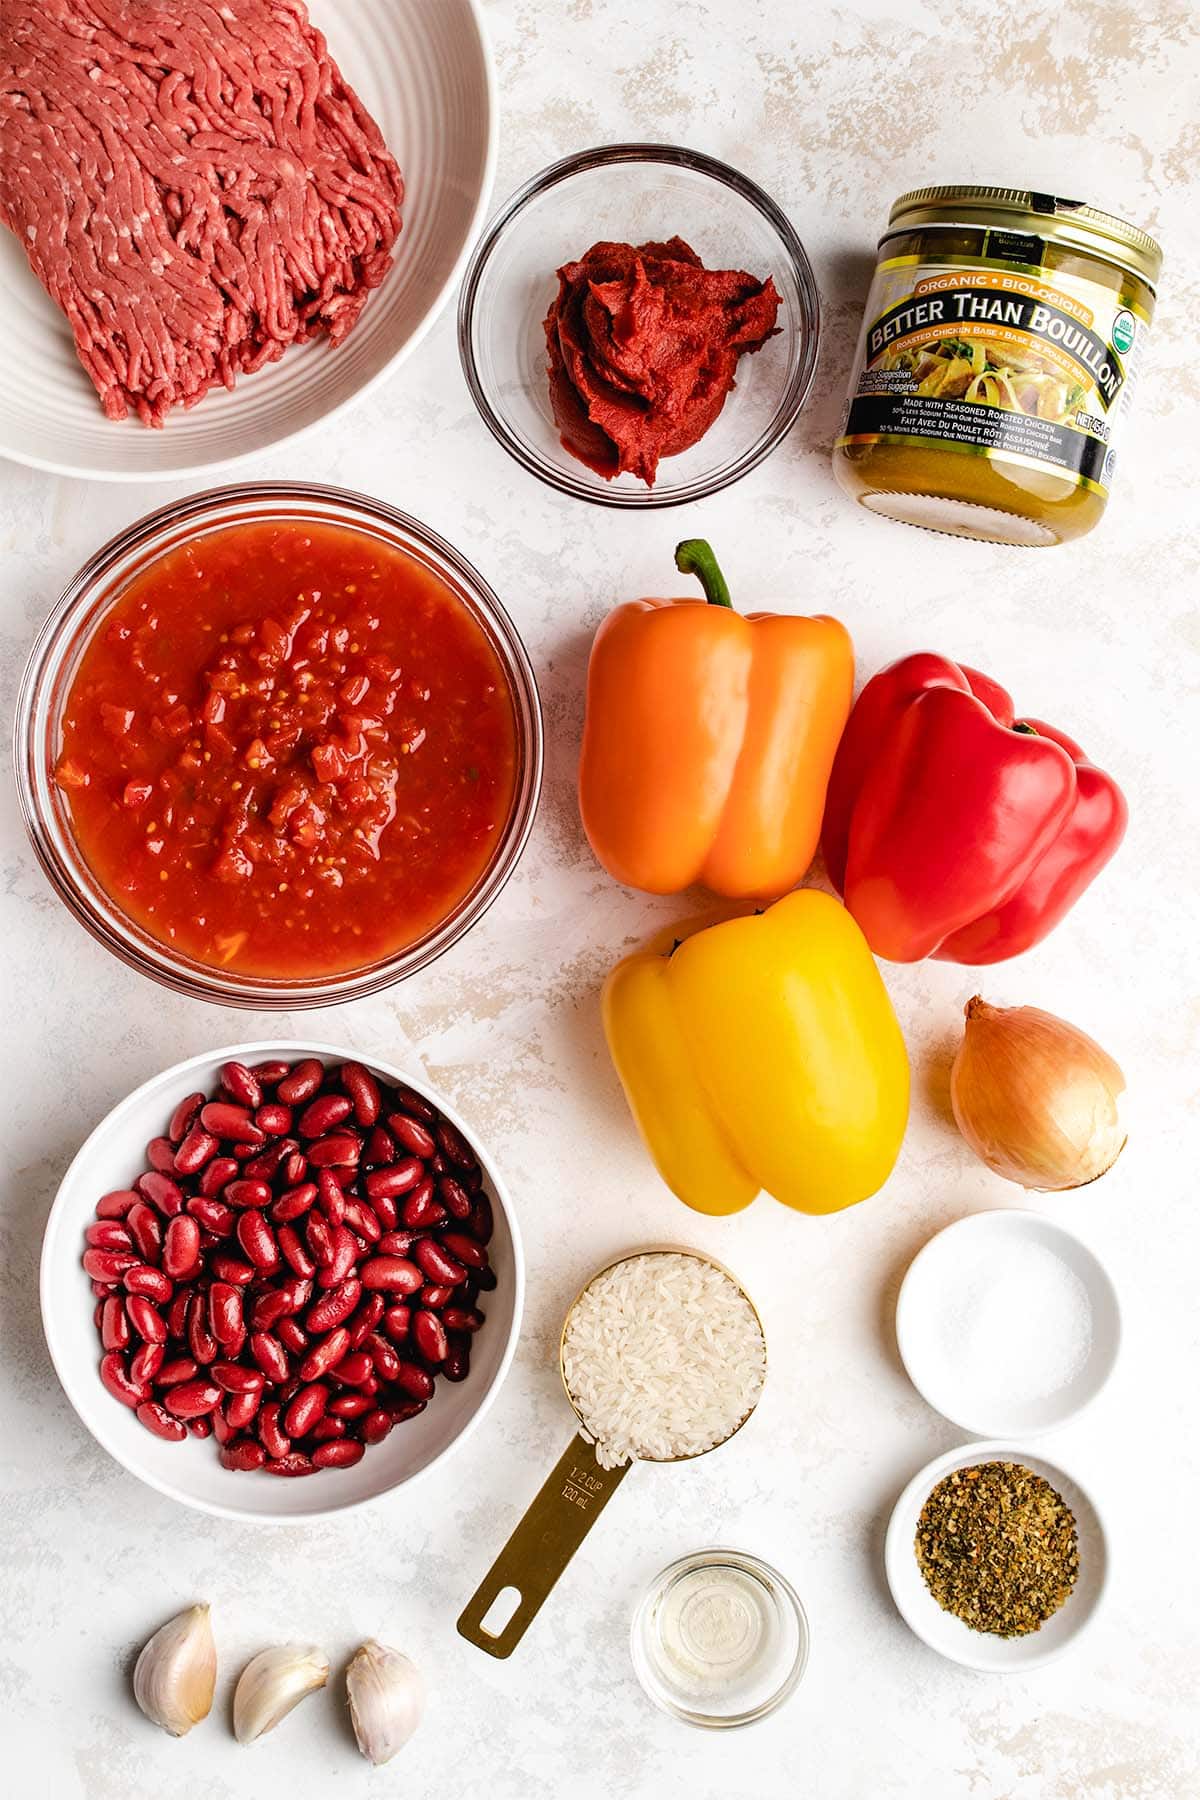 Ingredients for Instant Pot Stuffed Pepper Soup in glass bowls, viewed from overhead